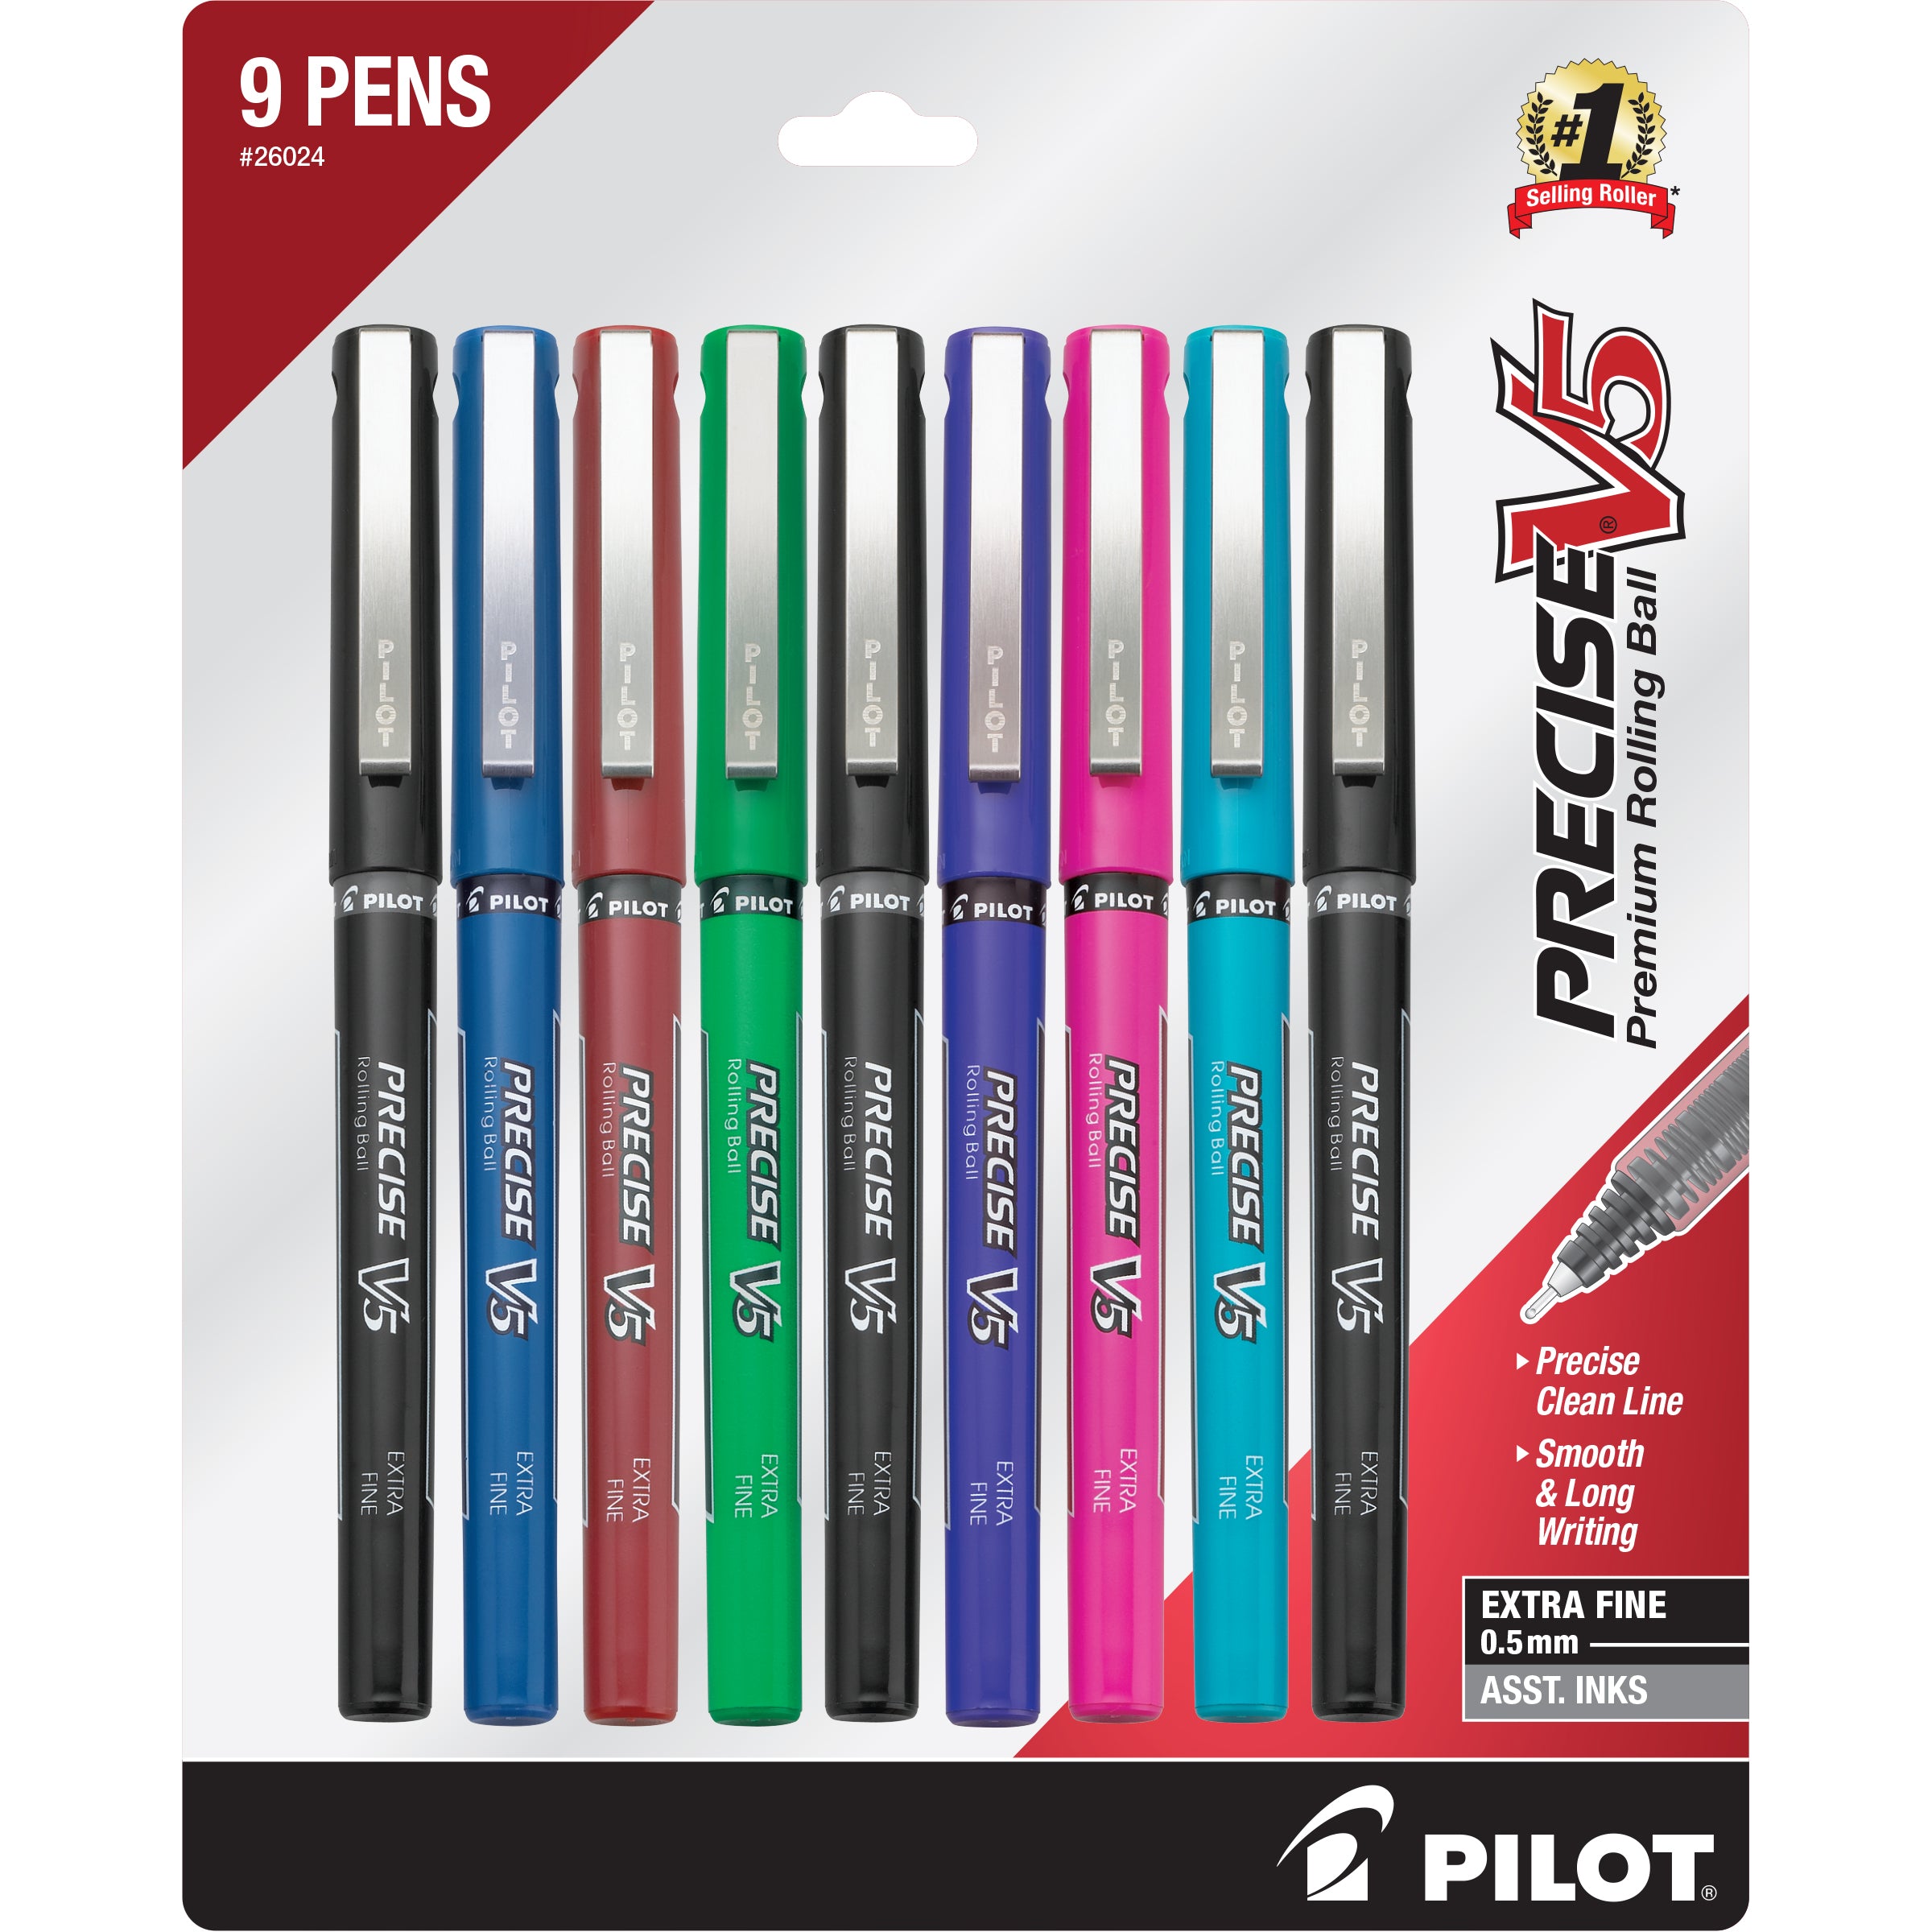 Pilot 26024 Precise V5 Rolling Ball Pens, Capped, 0.5mm Extra Fine Point, 9-Pack Assorted Color Inks, Black/Blue/Red/Green/Pink/Purple/Turquoise